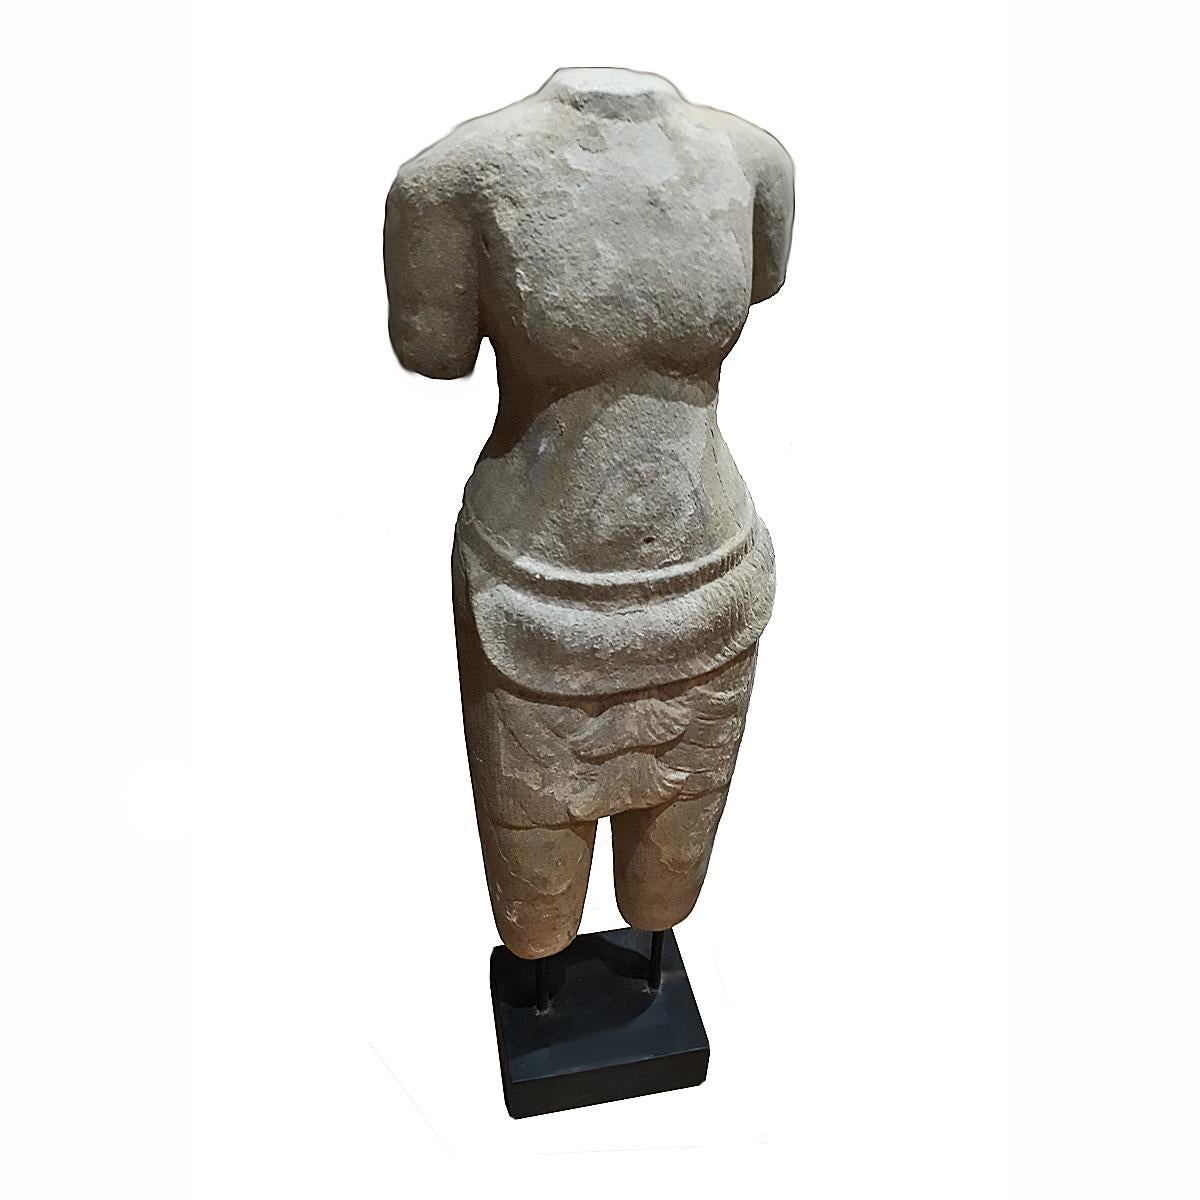 A table-top sculpture of a female torso in traditional attire, hand carved from a single piece of sandstone. From Thailand. Mounted on a wood / metal stand. 29 inches high.